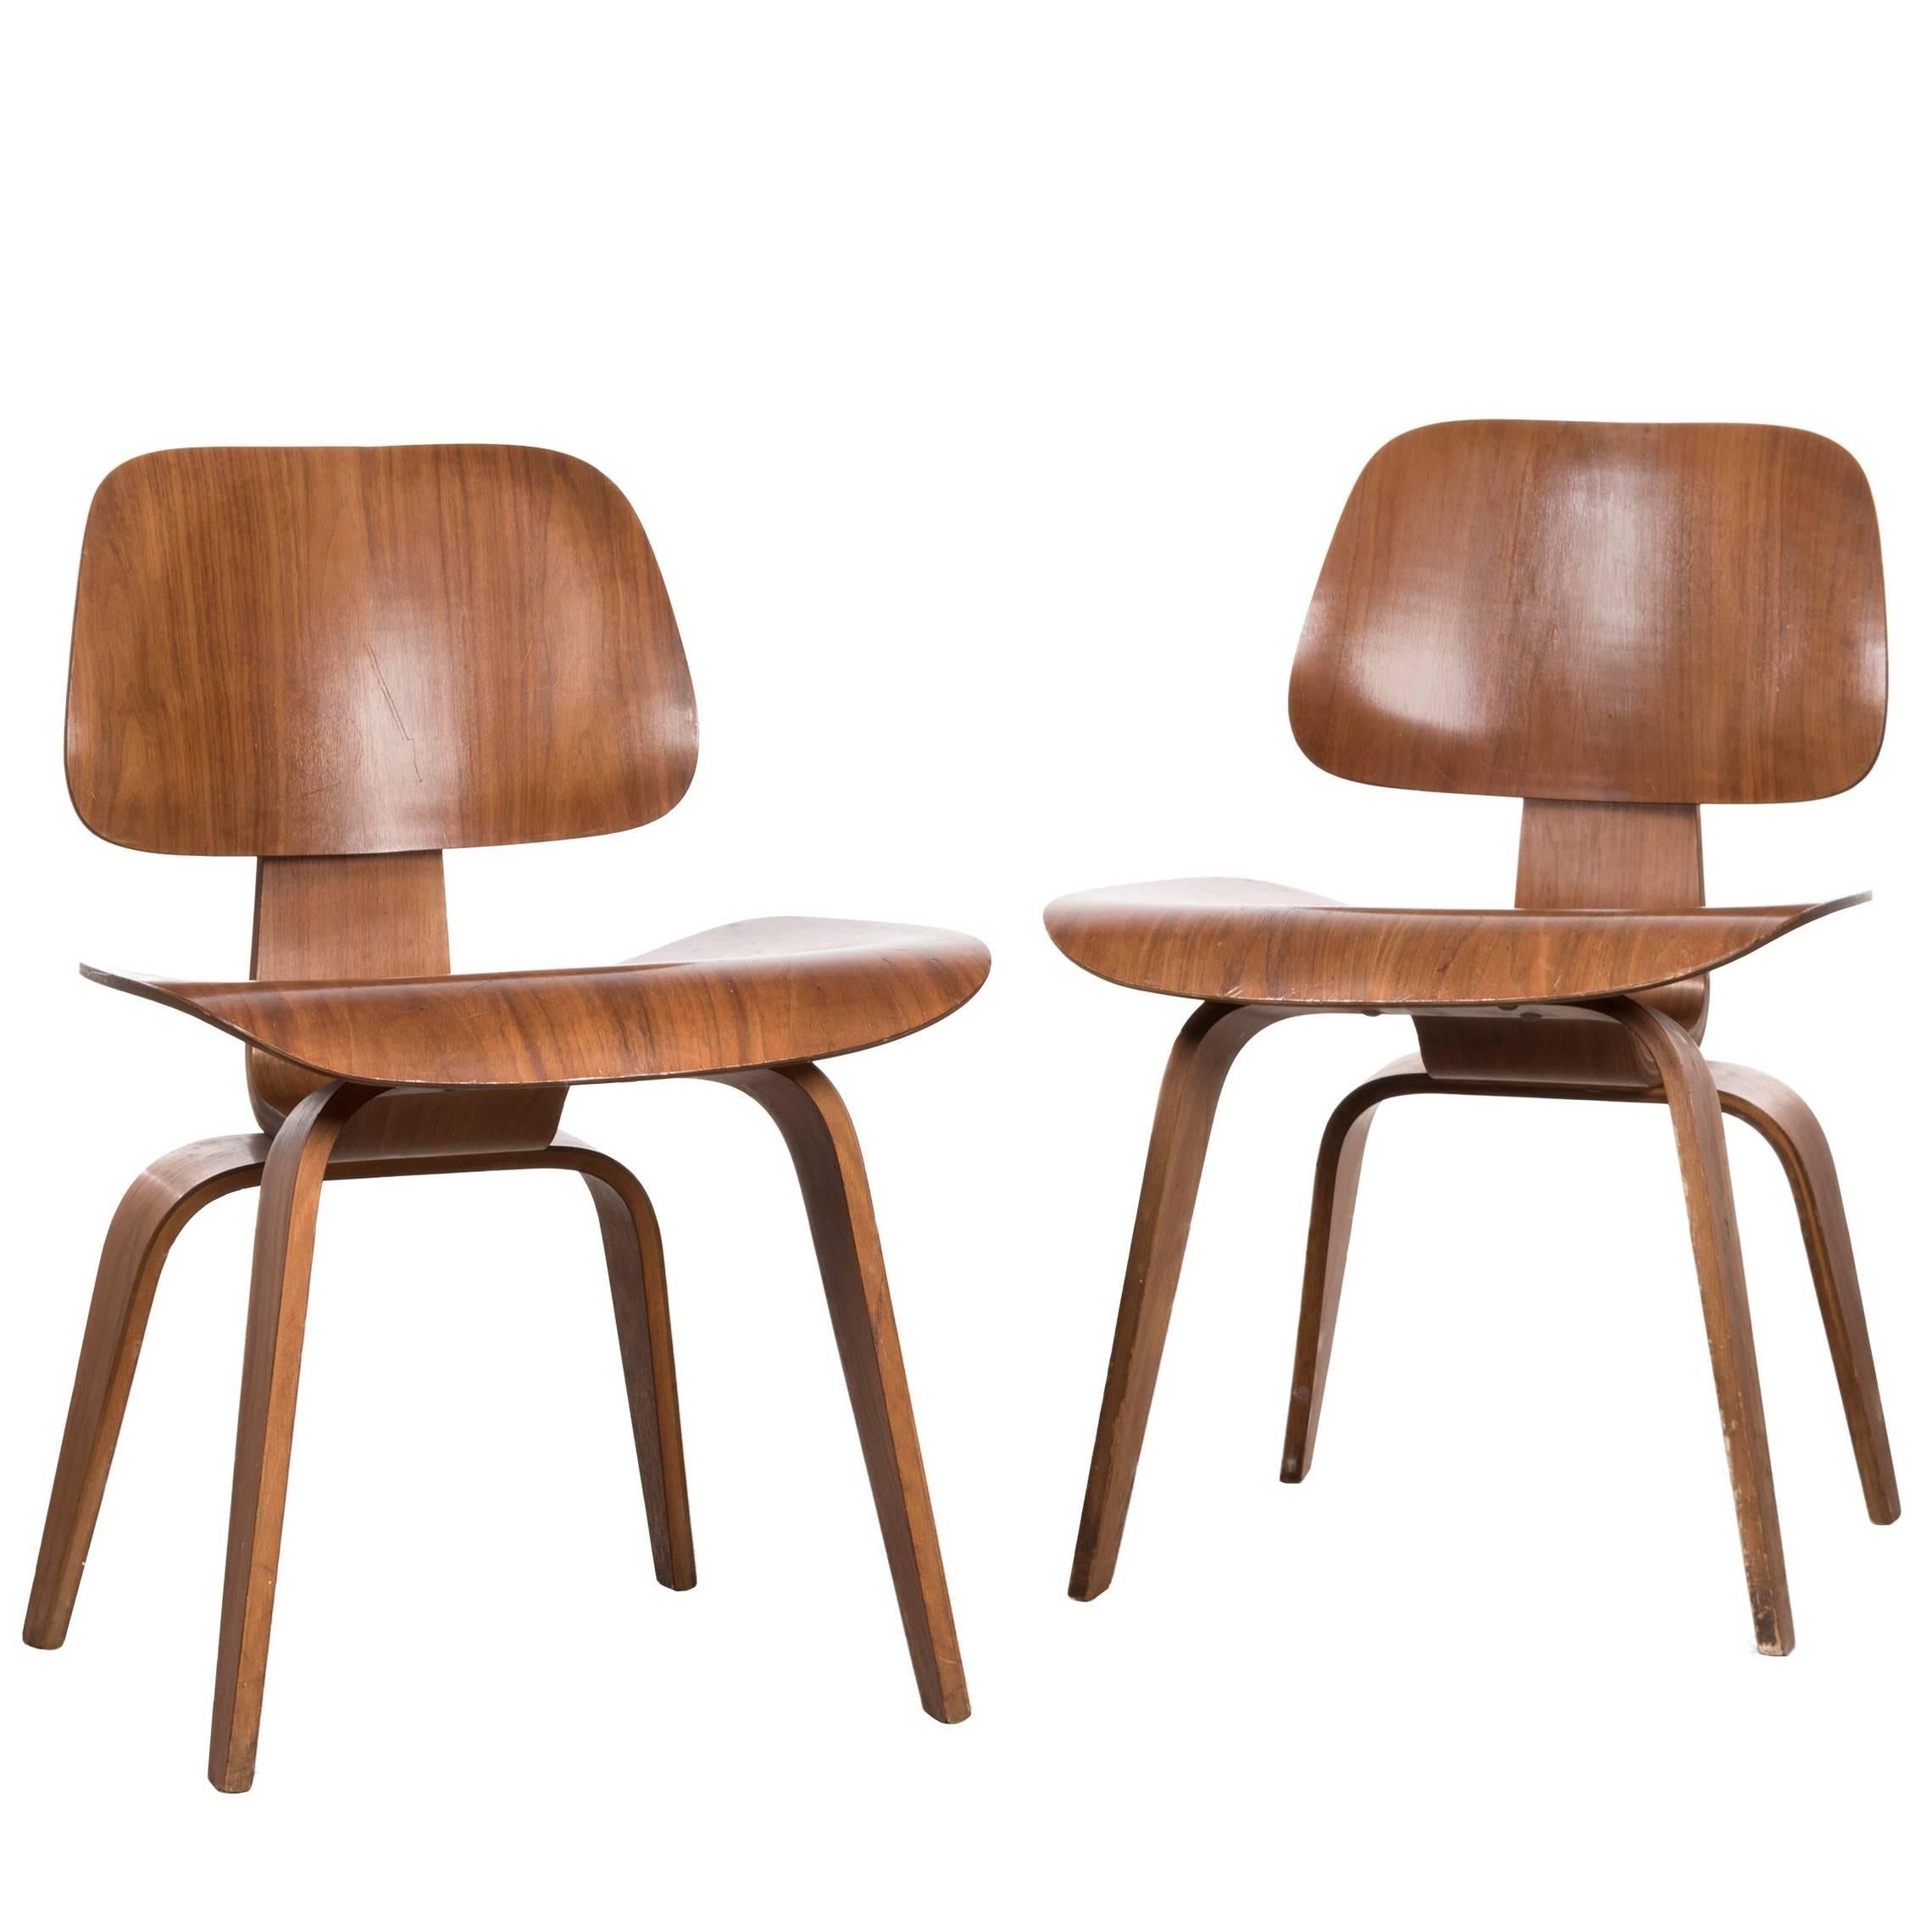 Eames DCW Walnut Dining Chair for Herman Miller